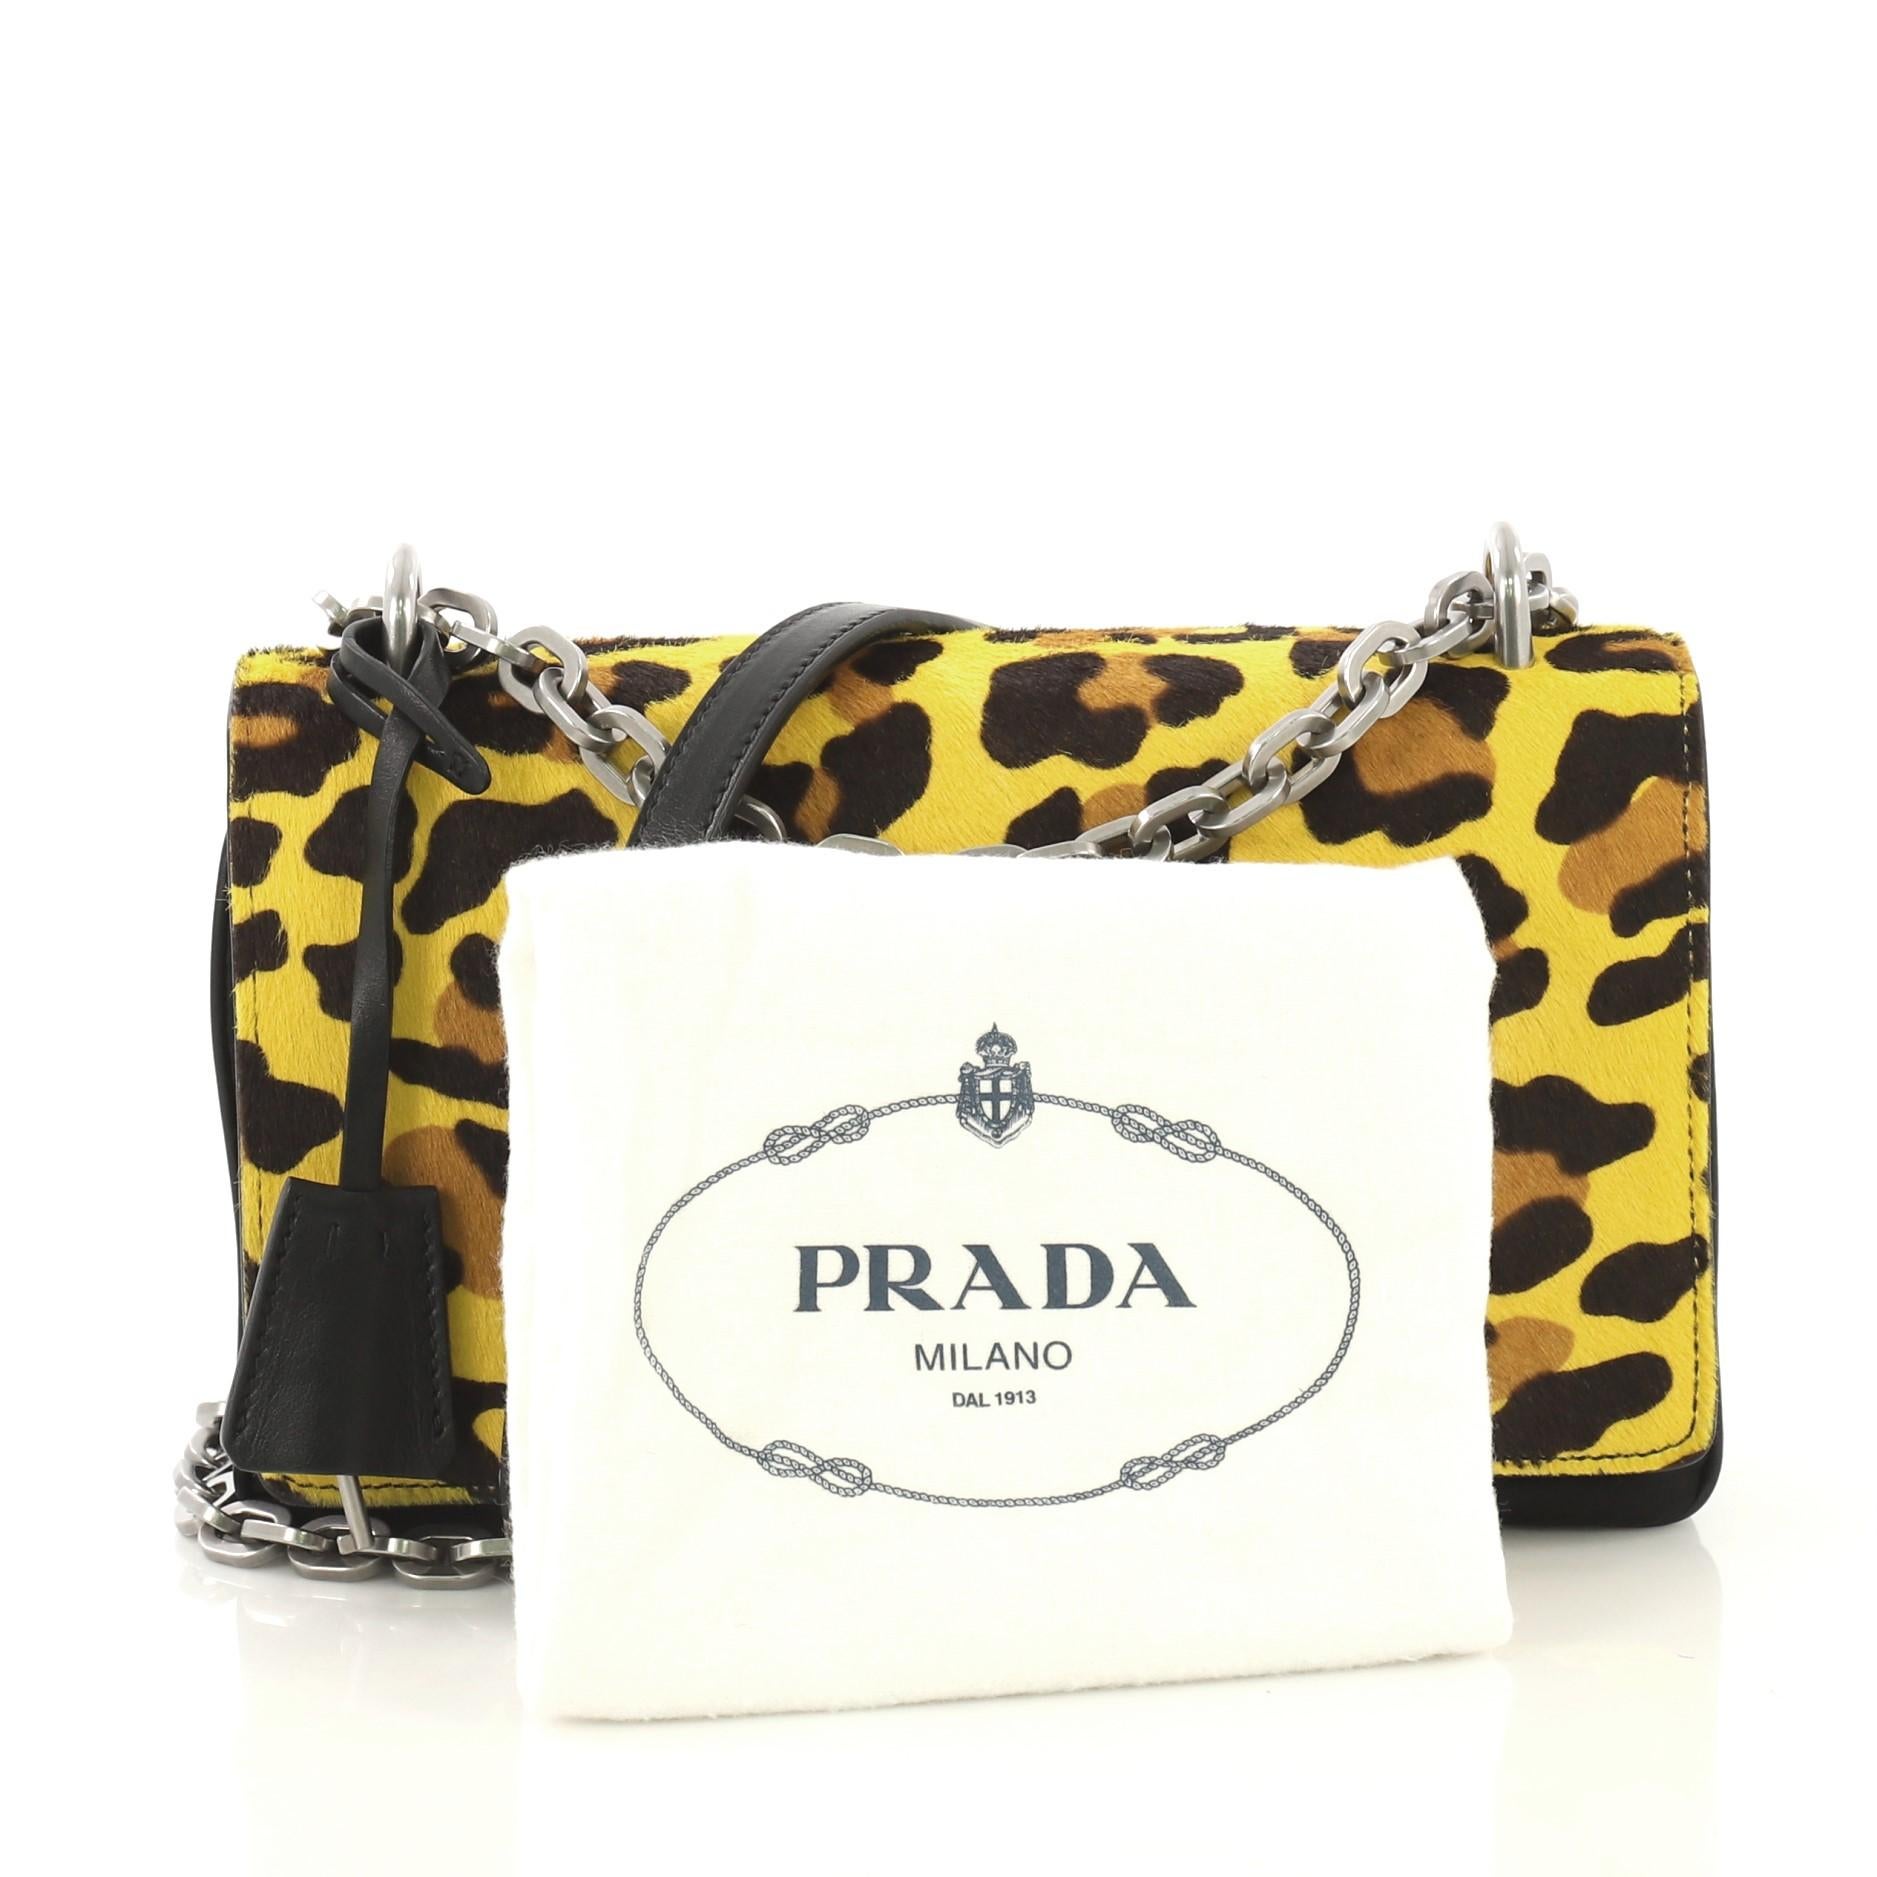 This Prada Chain Flap Shoulder Bag Pony Hair and Nylon Medium, crafted from yellow printed pony hair and black nylon, features chain link shoulder strap, frontal flap, accordion sides, and silver-tone hardware. Its metal closure opens to a black